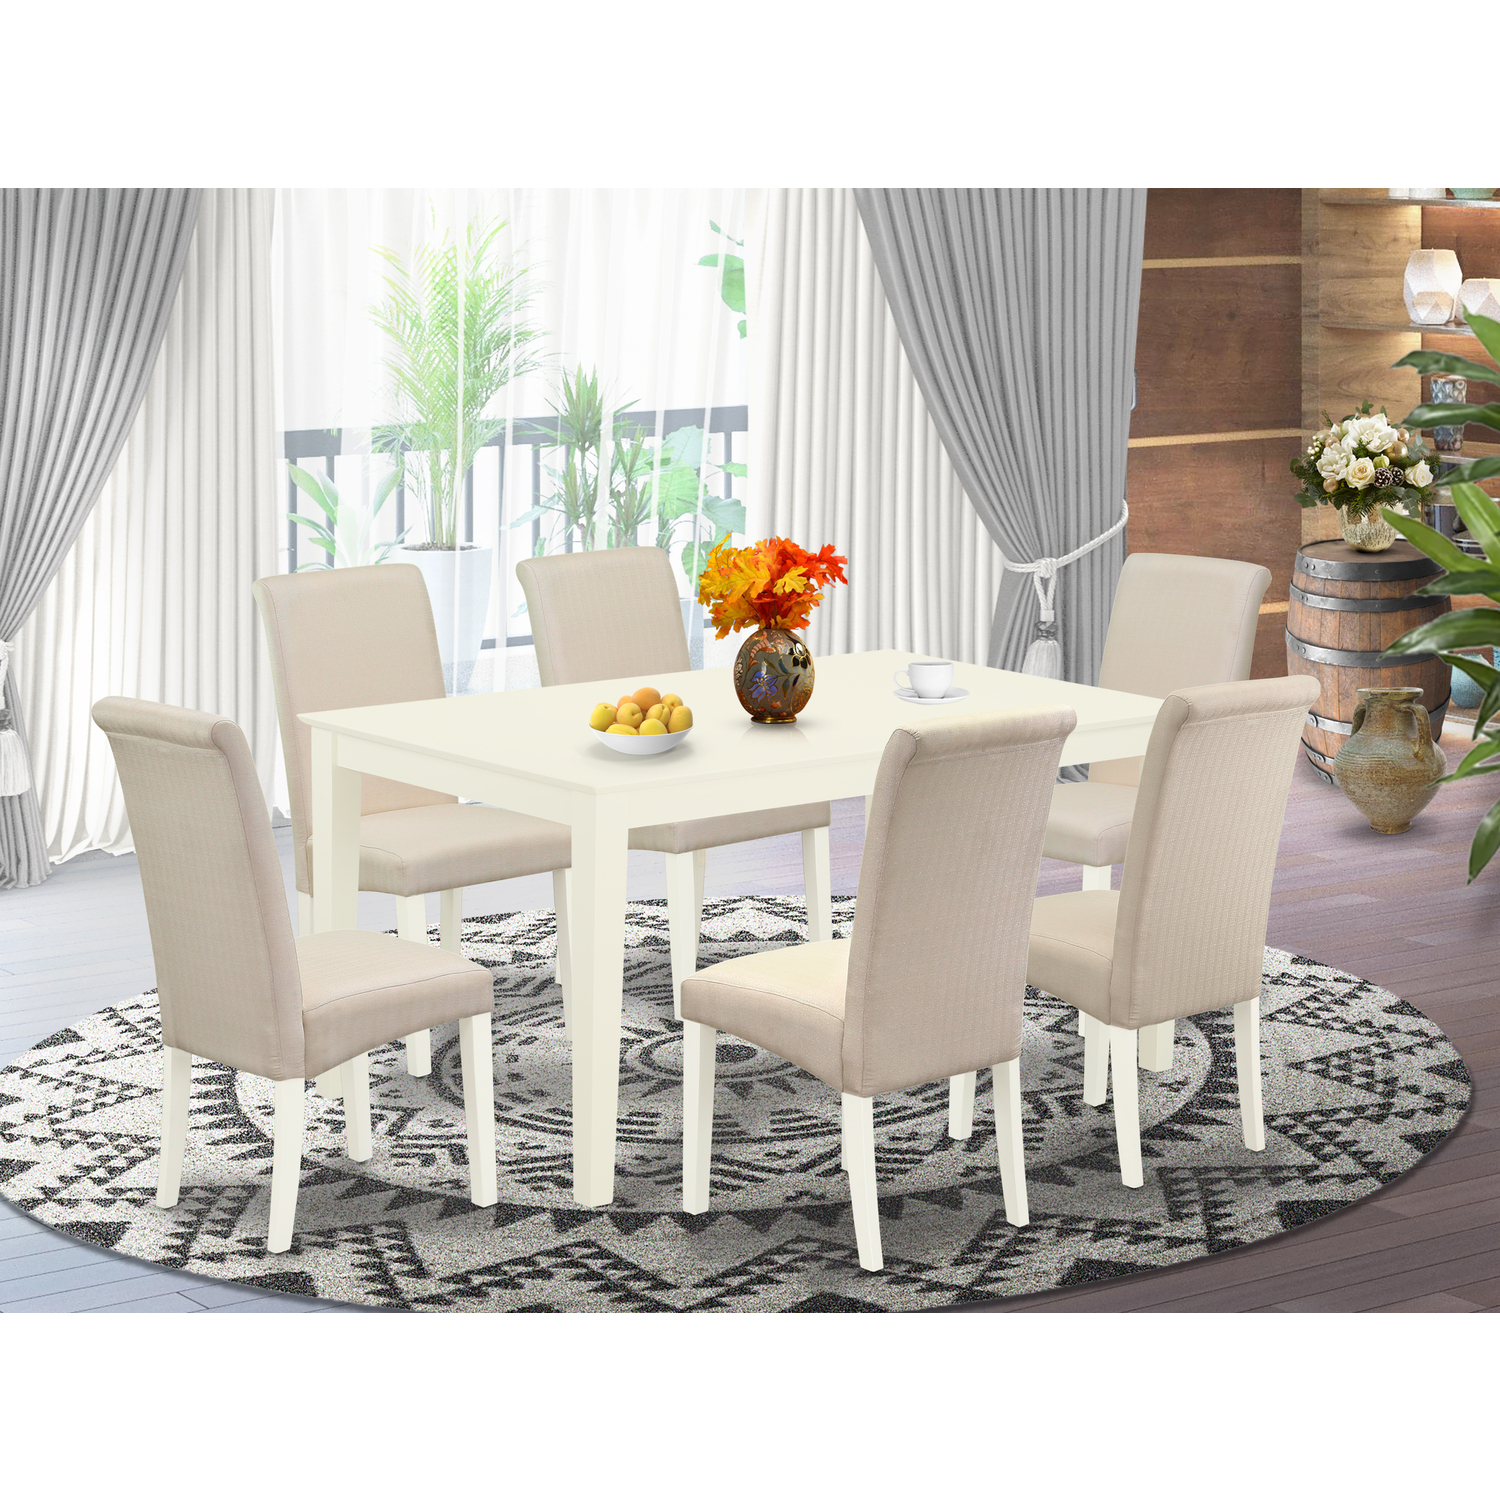 East West Furniture Capri 7-piece Wood Dining Set in Linen White/Cream - image 1 of 5